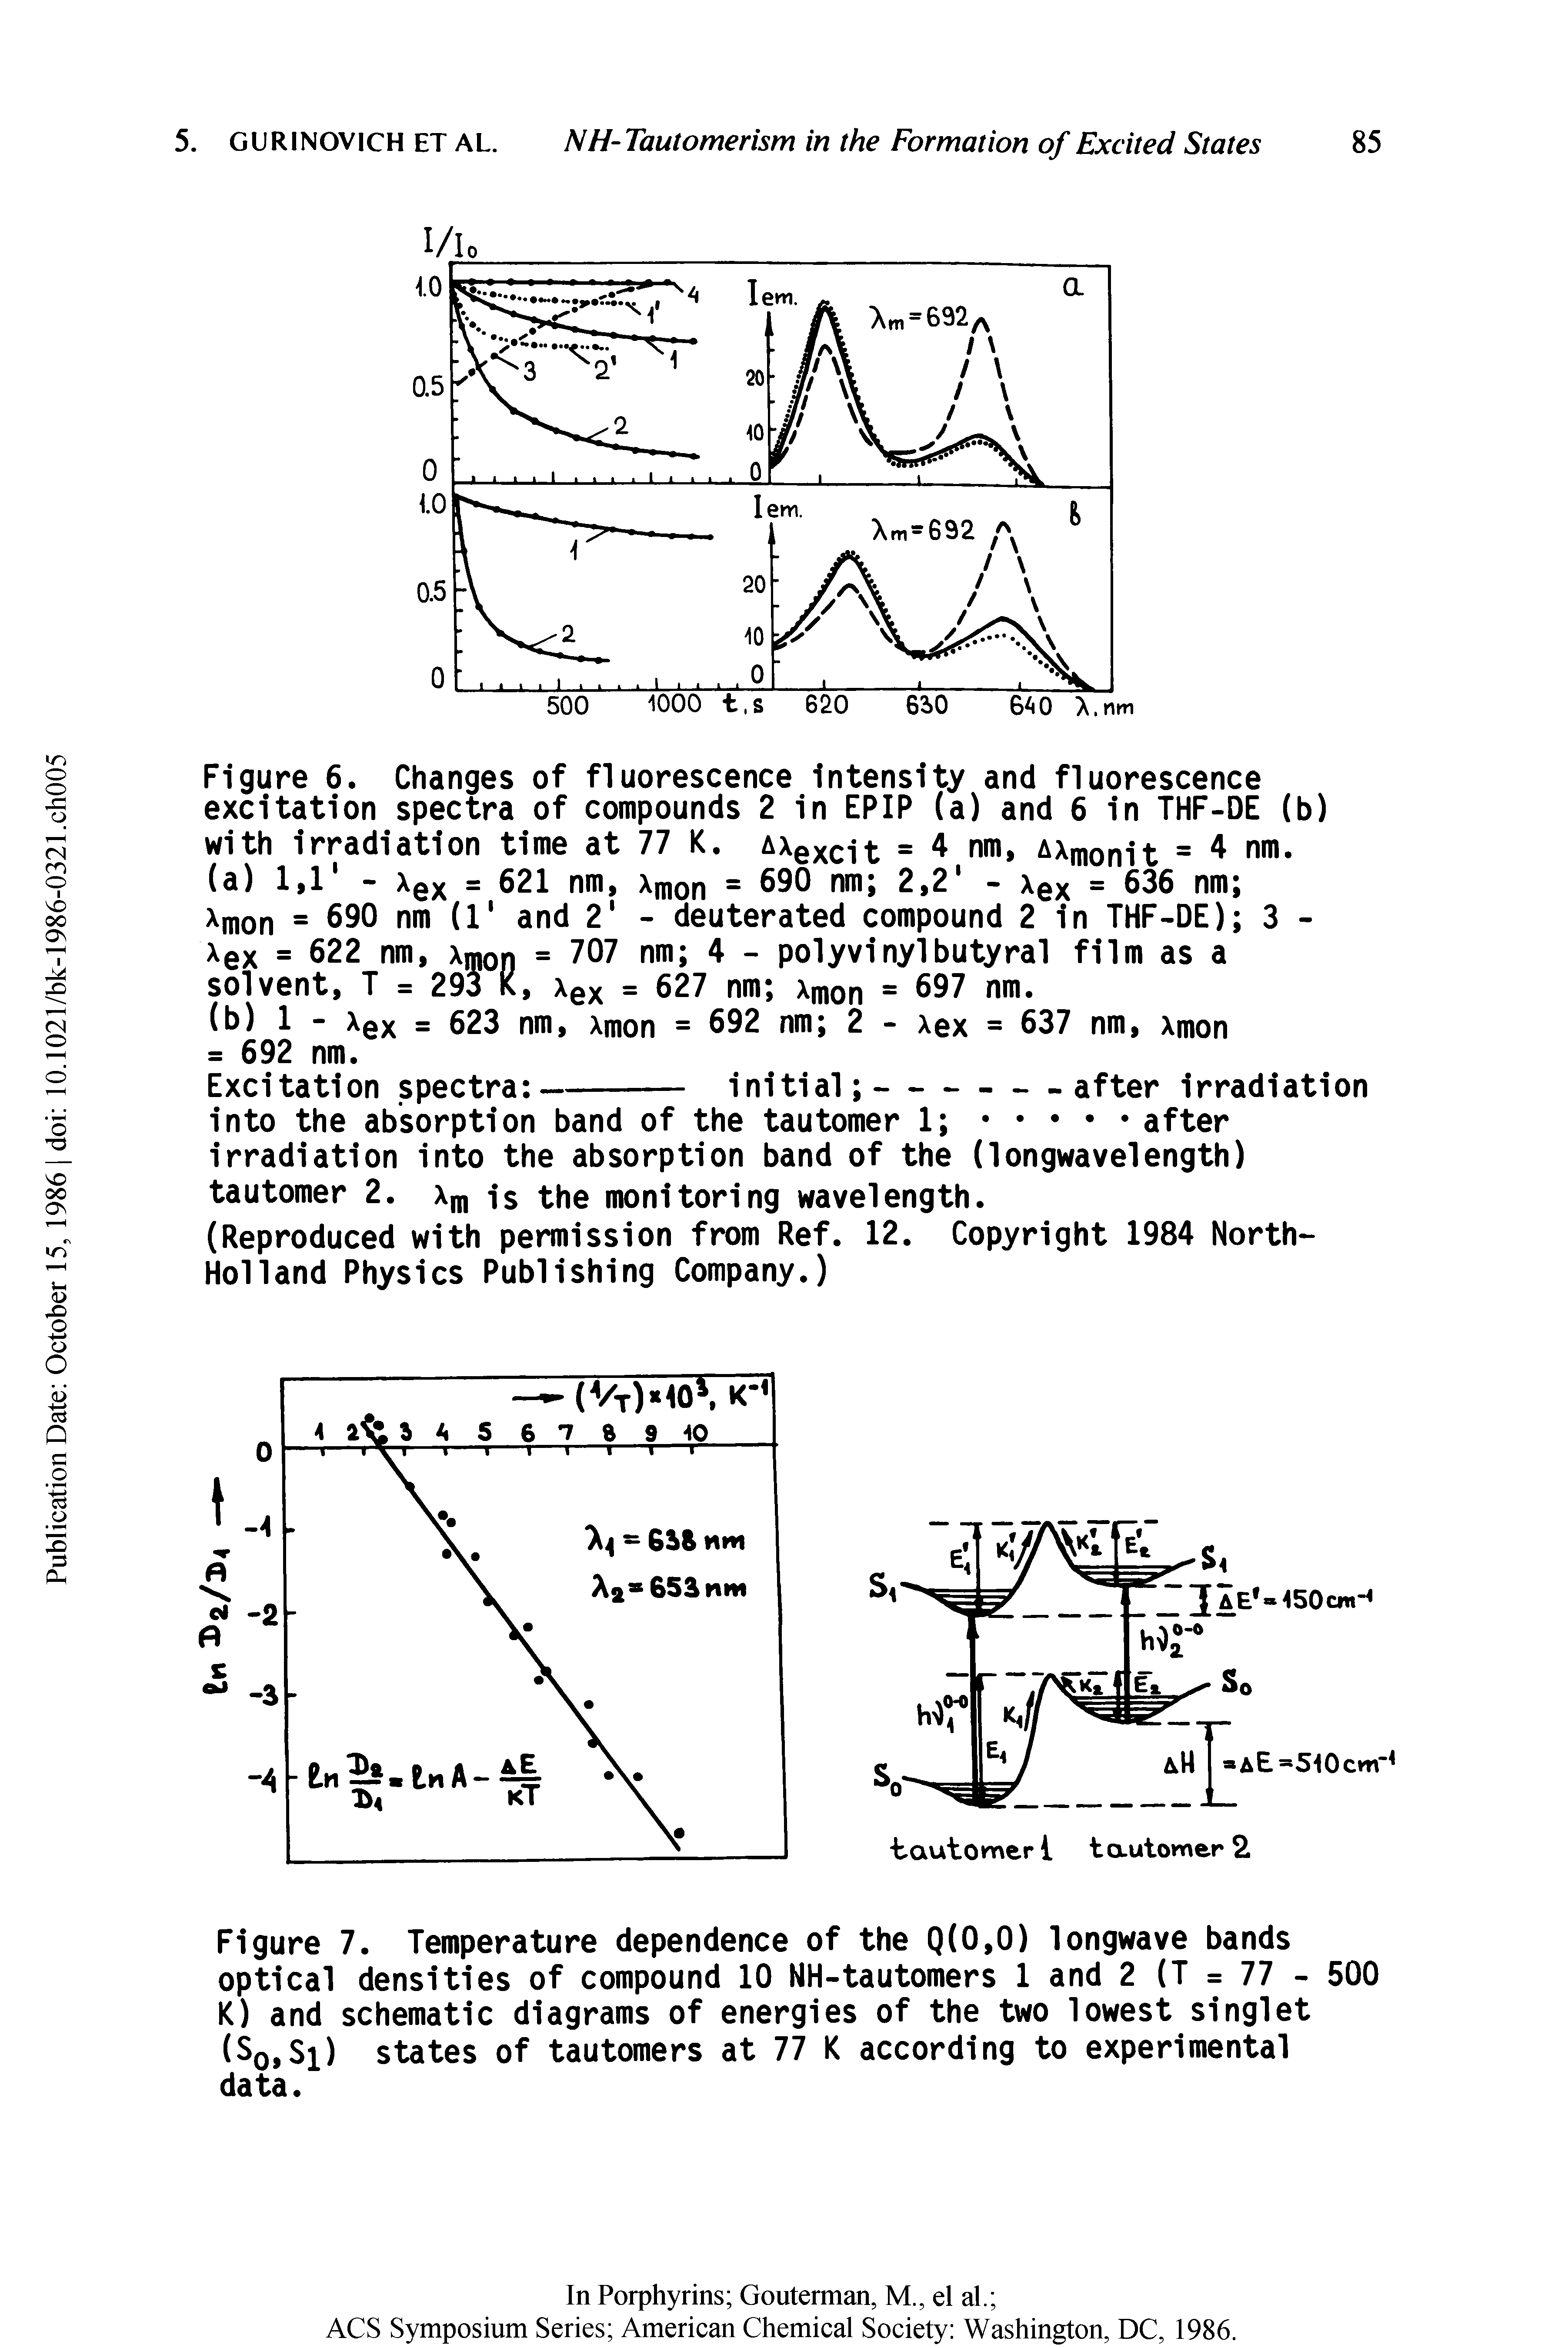 Figure 7. Temperature dependence of the Q(0,0) longwave bands optical densities of compound 10 NH-tautomers 1 and 2 (T = 77 - 500 K) and schematic diagrams of energies of the two lowest singlet (6o,Si) states of tautomers at 77 K according to experimental data.